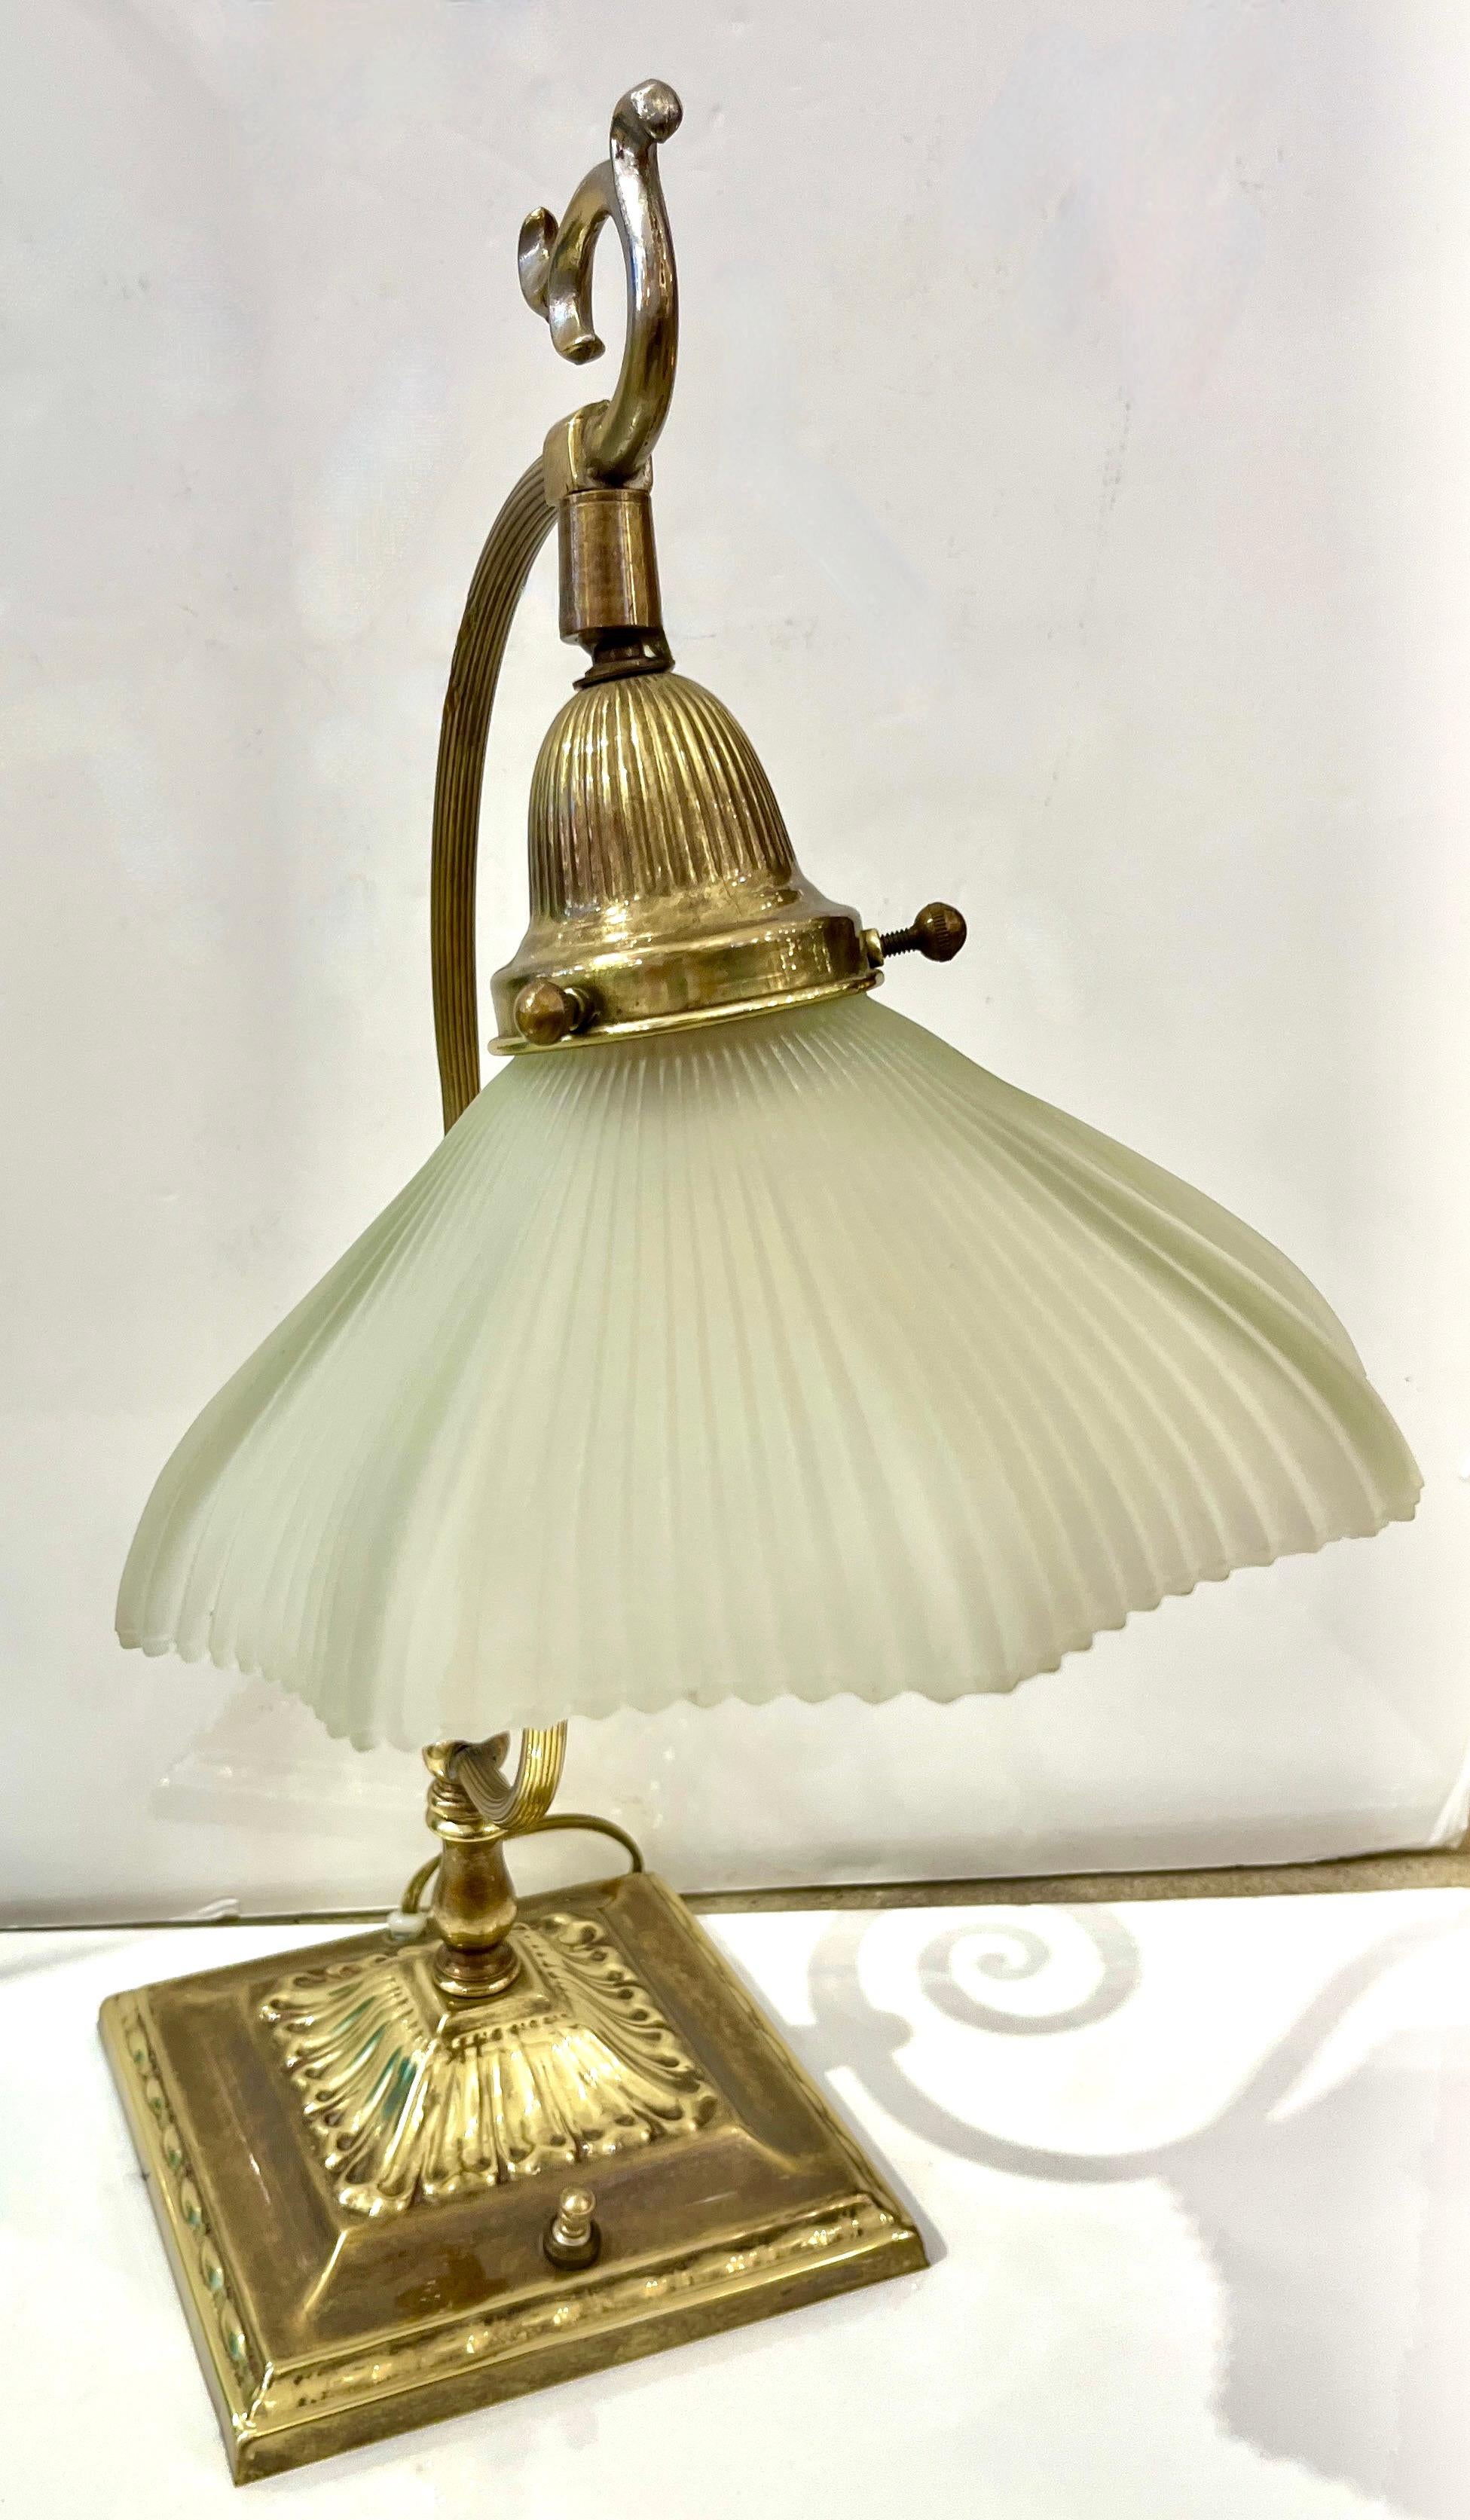 North American 1950s American Art Deco Style Brass Table/Desk Lamp with Satin White Glass Shade For Sale